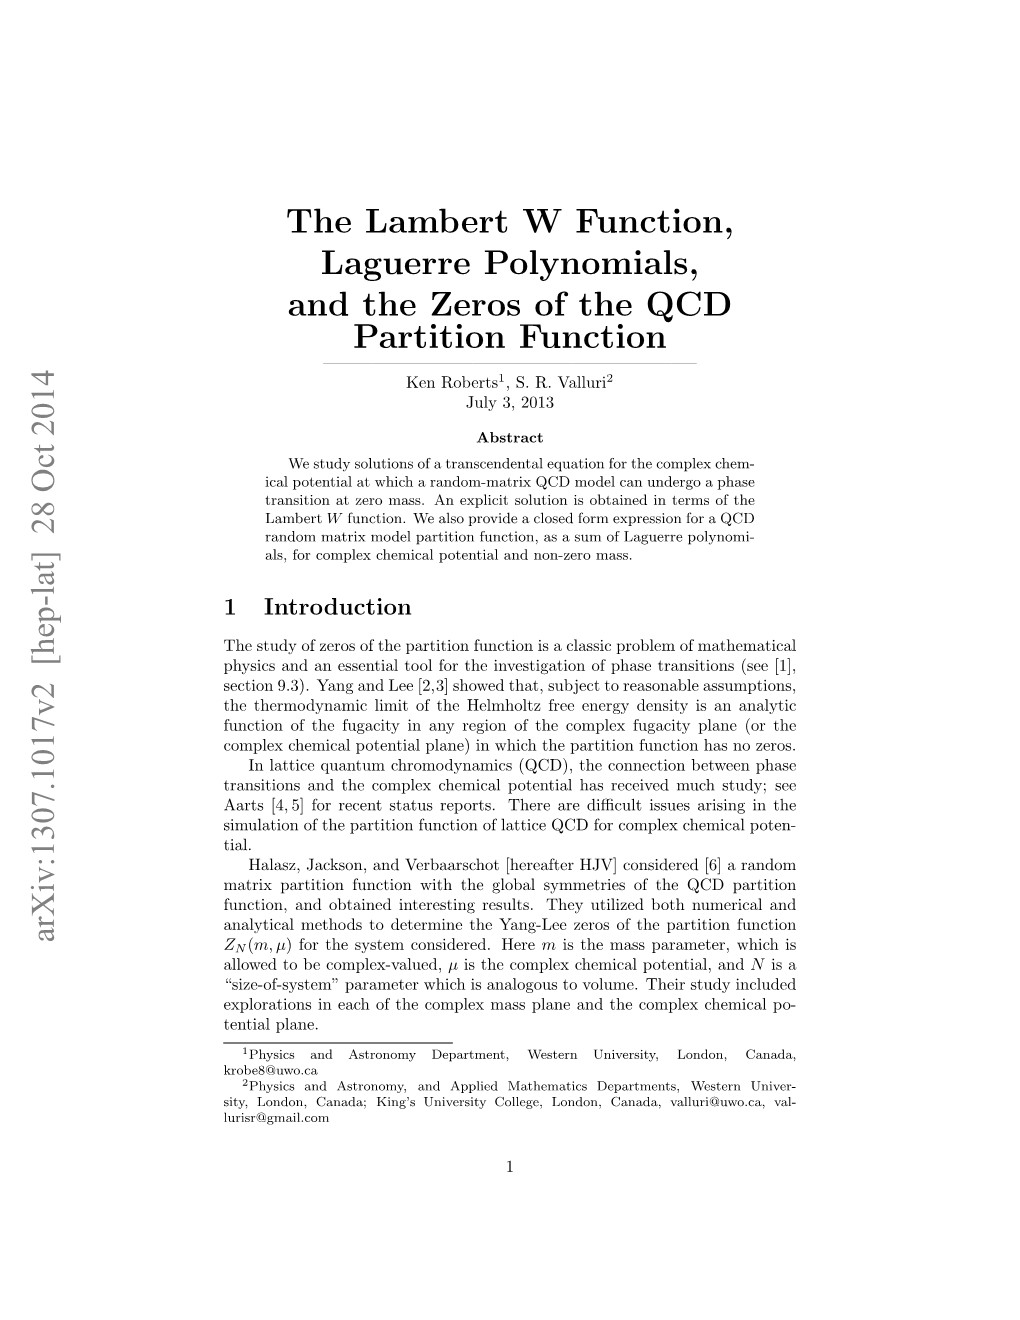 The Lambert W Function, Laguerre Polynomials, and the Zeros of the QCD Partition Function ——————————————————————– Ken Roberts1, S